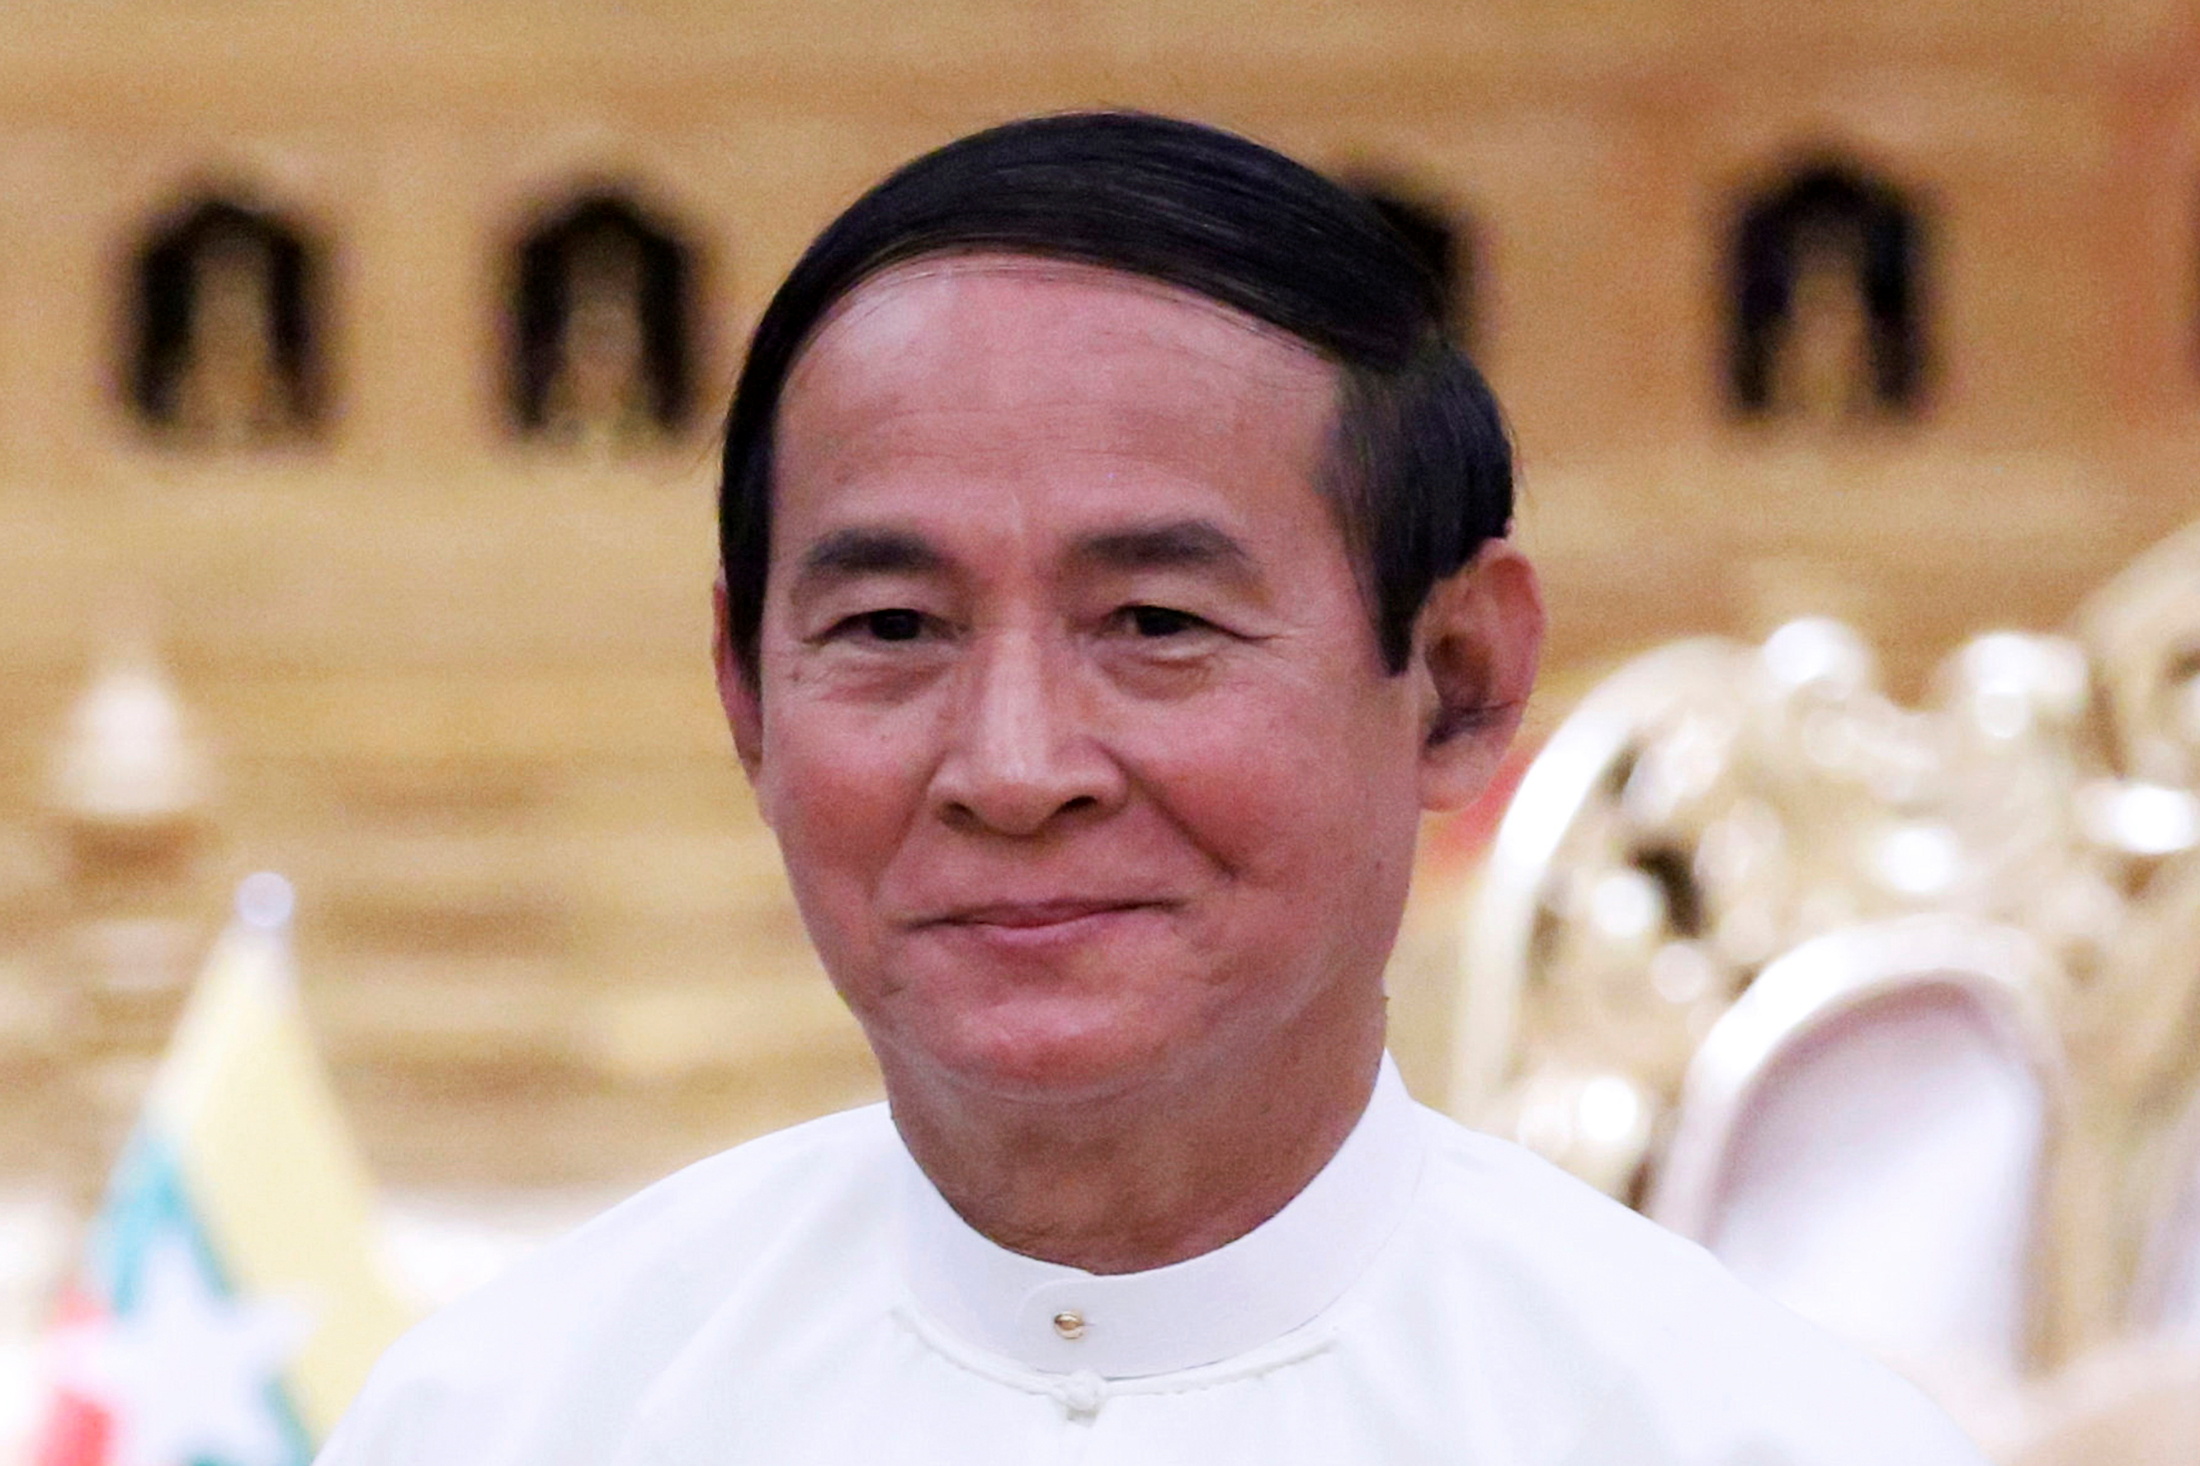 Myanmar President Win Myint is pictured at the Presidential Palace in Naypyitaw